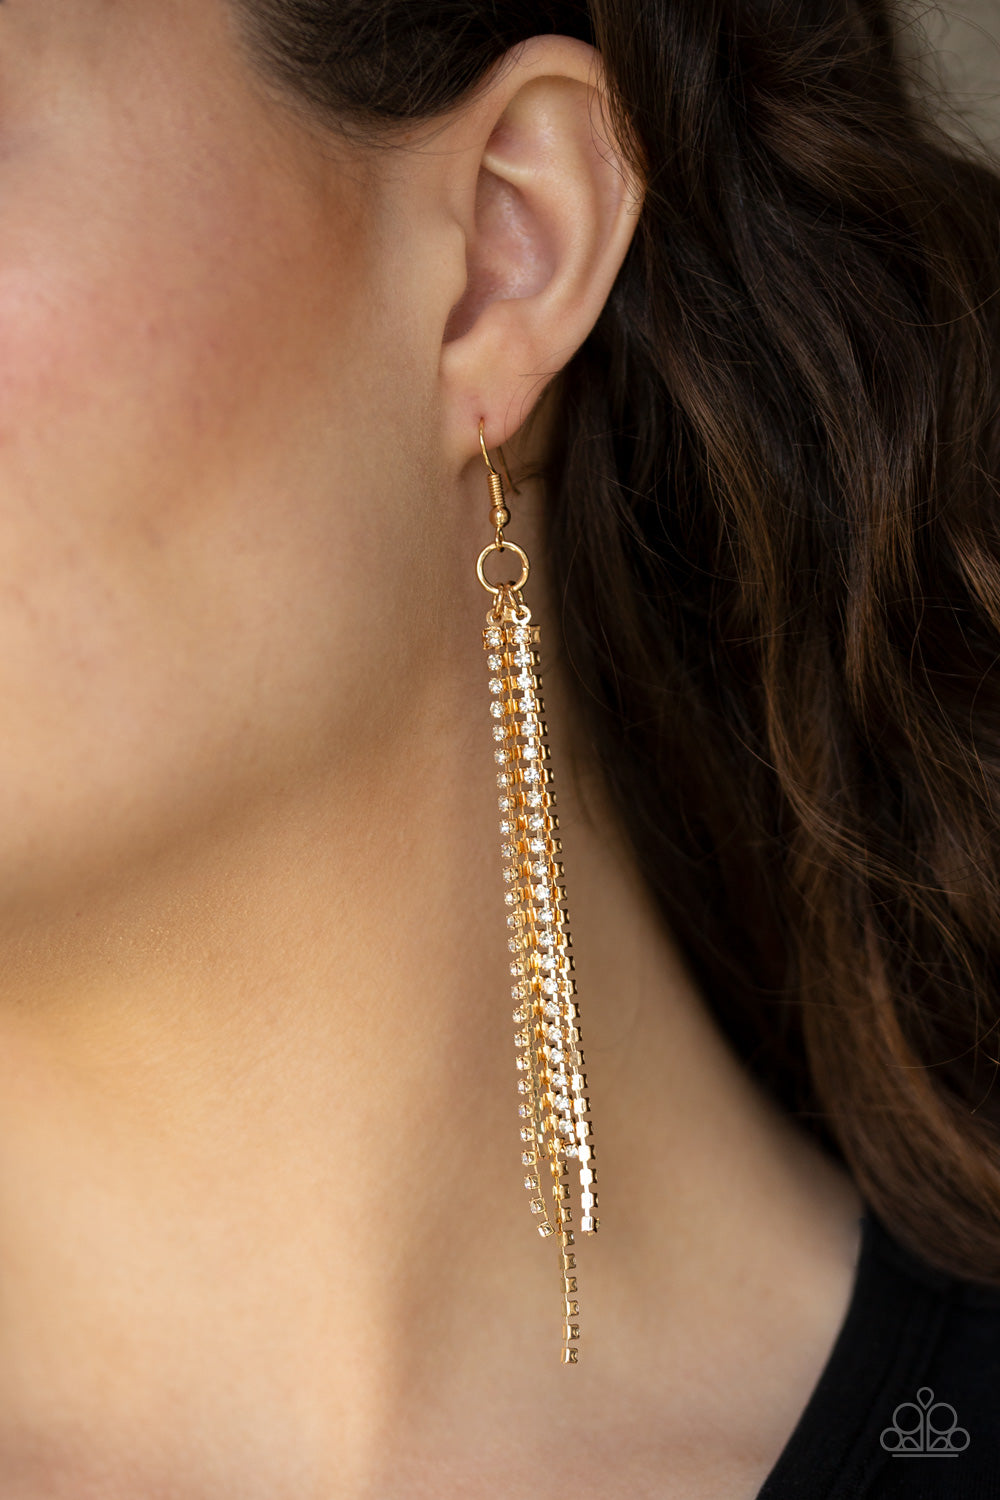 Center Stage Status - Gold Earrings - Paparazzi Accessories 